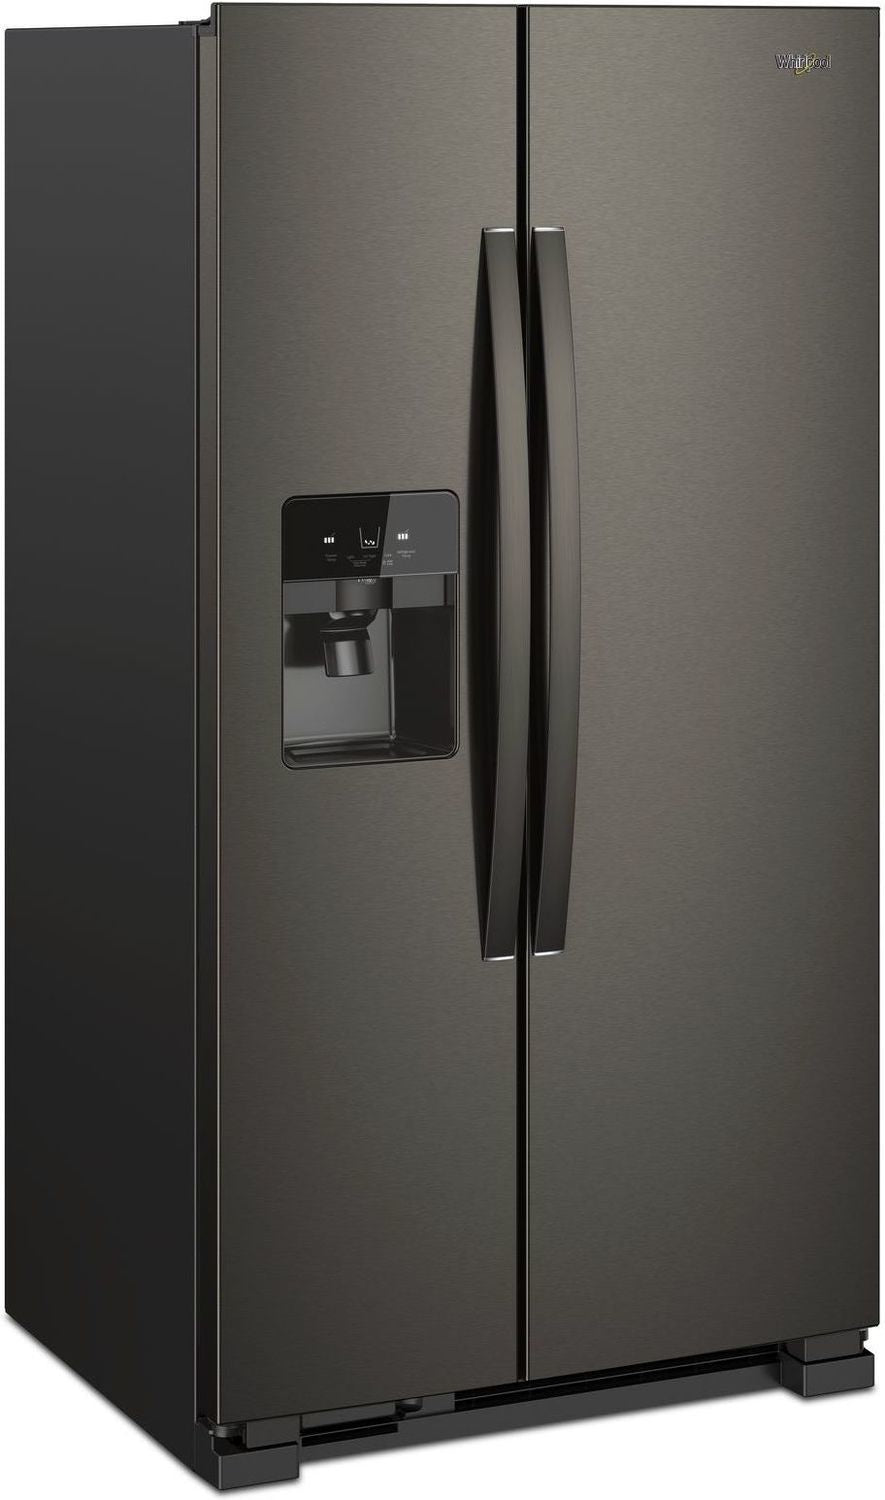 Whirlpool Black Stainless Steel Side-by-Side Refrigerator (25 Cu. Ft.) - WRS325SDHV